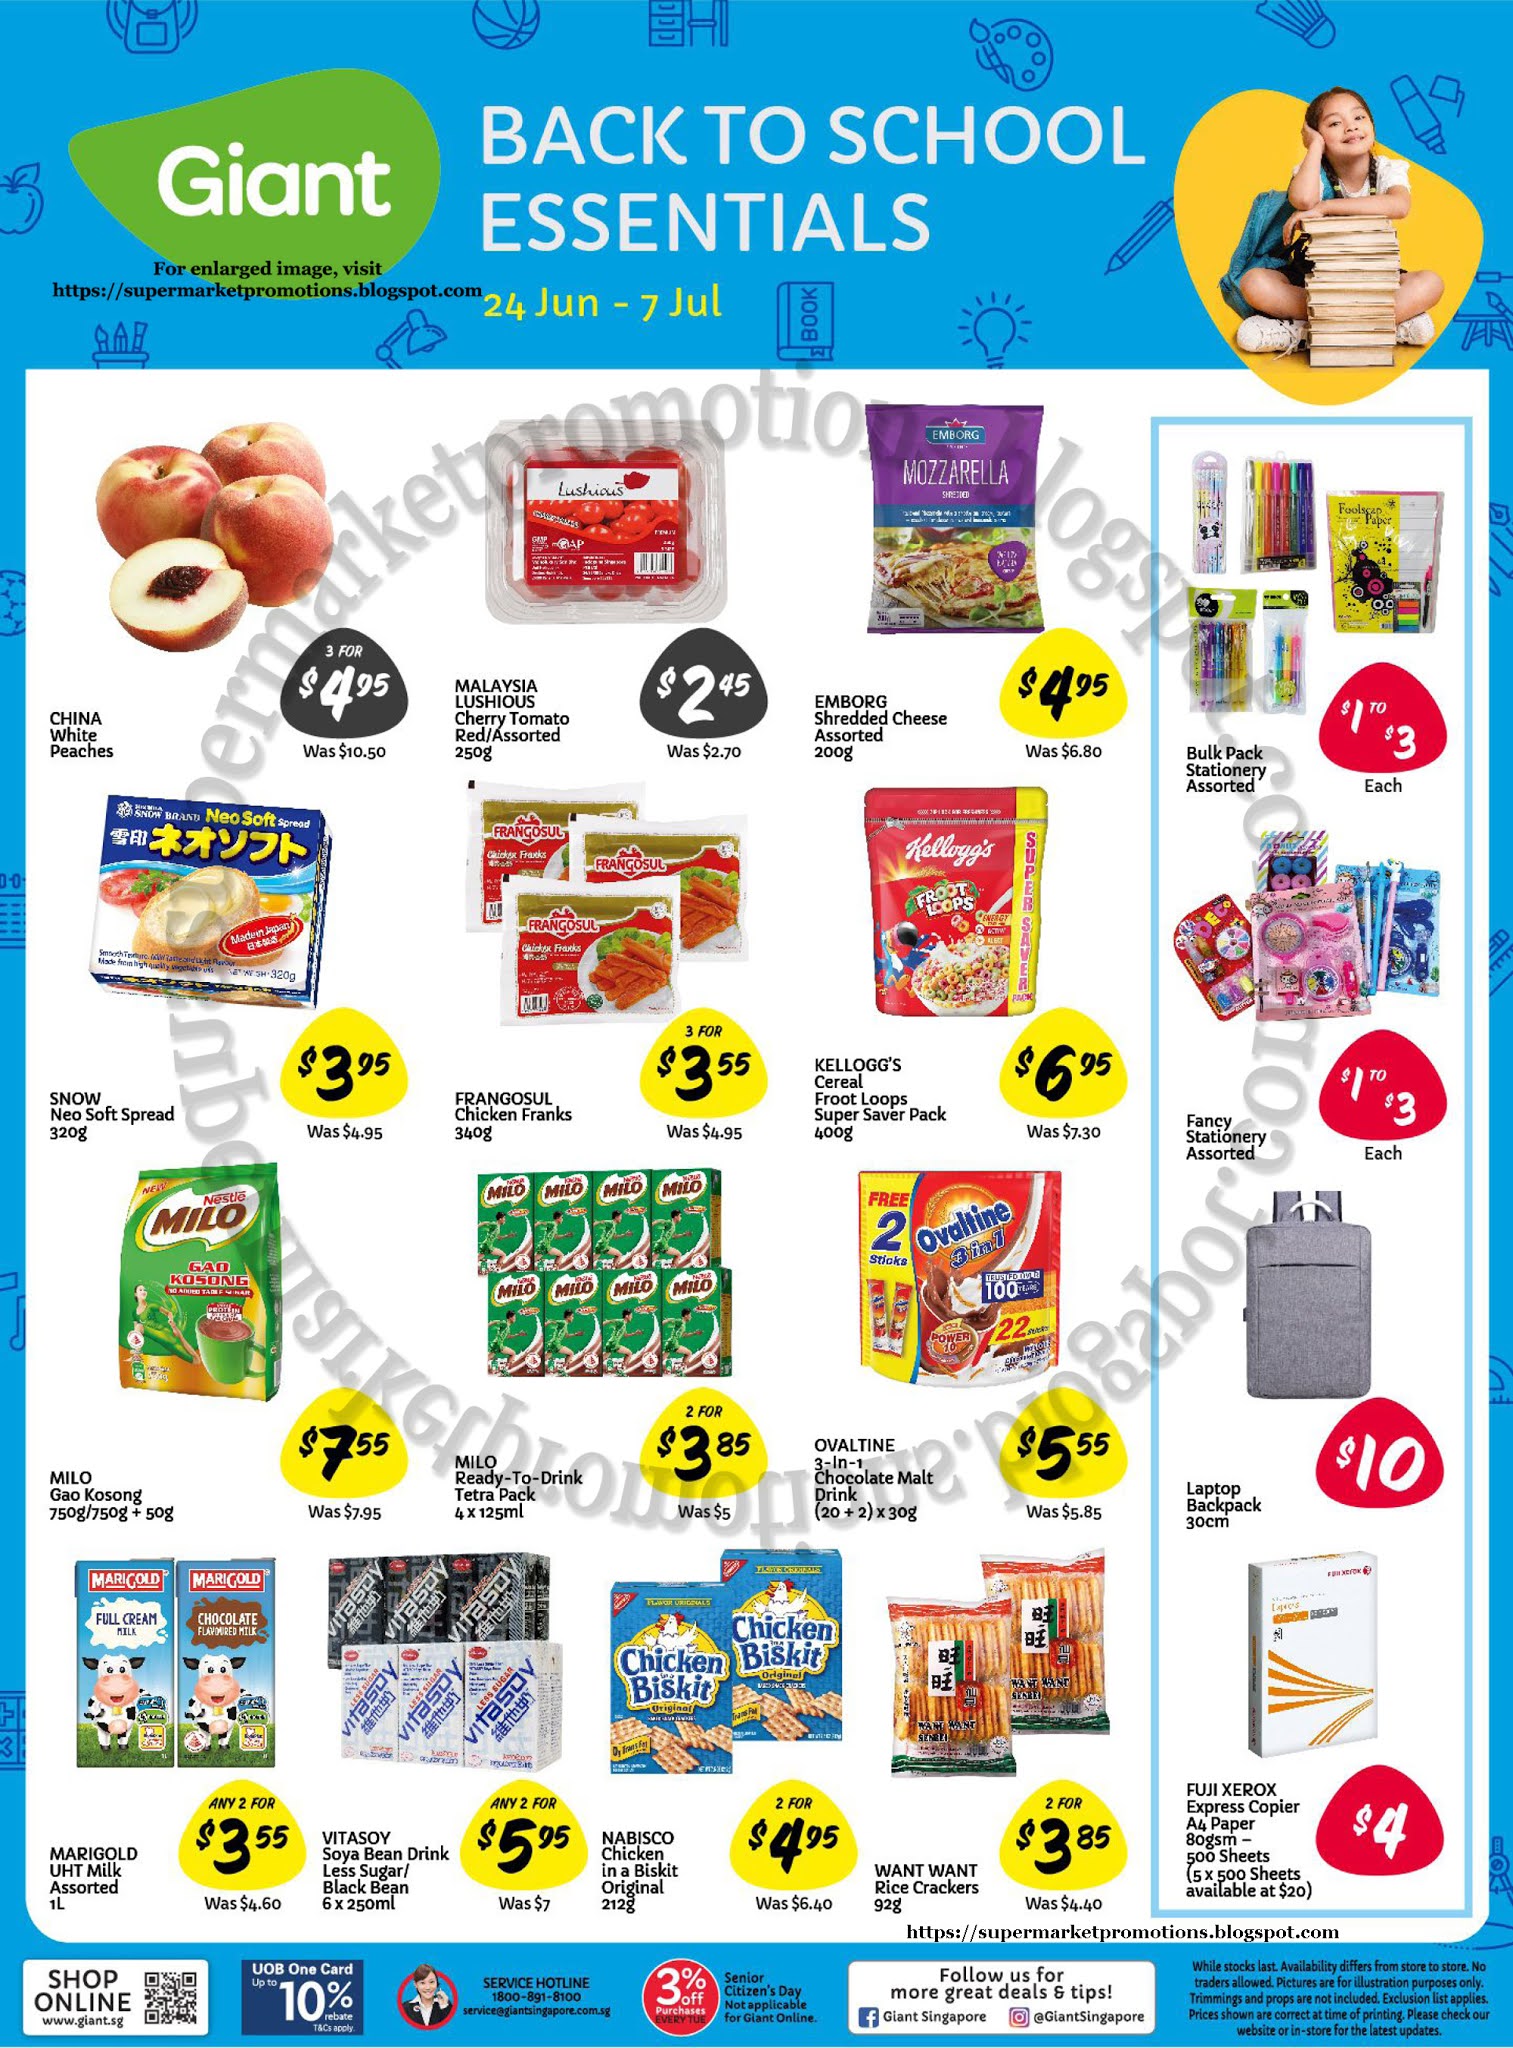 Giant Back To School Essentials Promotion 24 June 07 